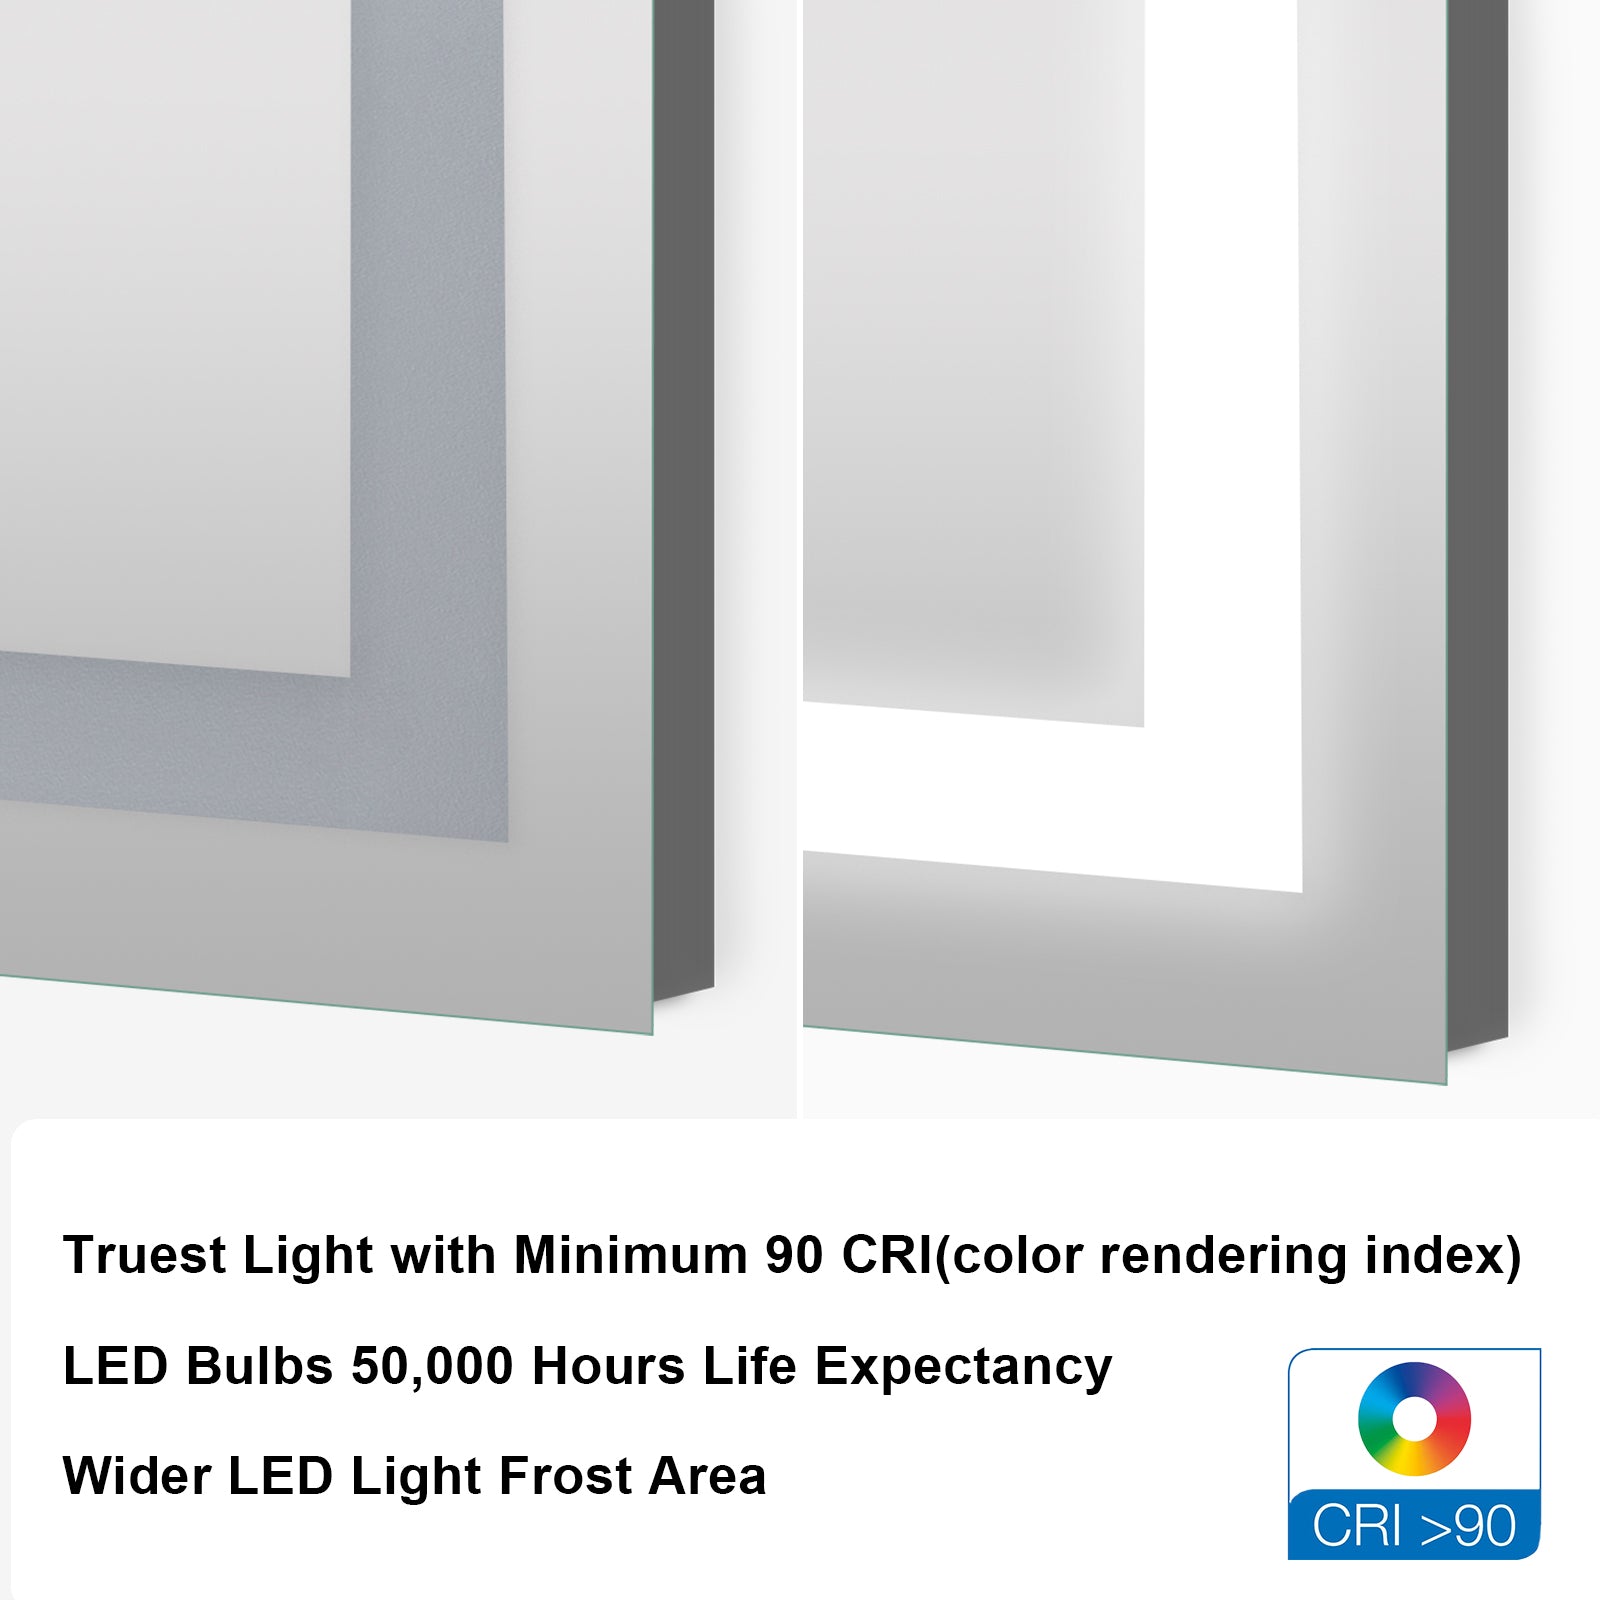 ZNTS 28x36 Inch LED Lighted Bathroom Mirror with 3 Colors Light, Wall Mounted Bathroom Vanity Mirror with W156267688